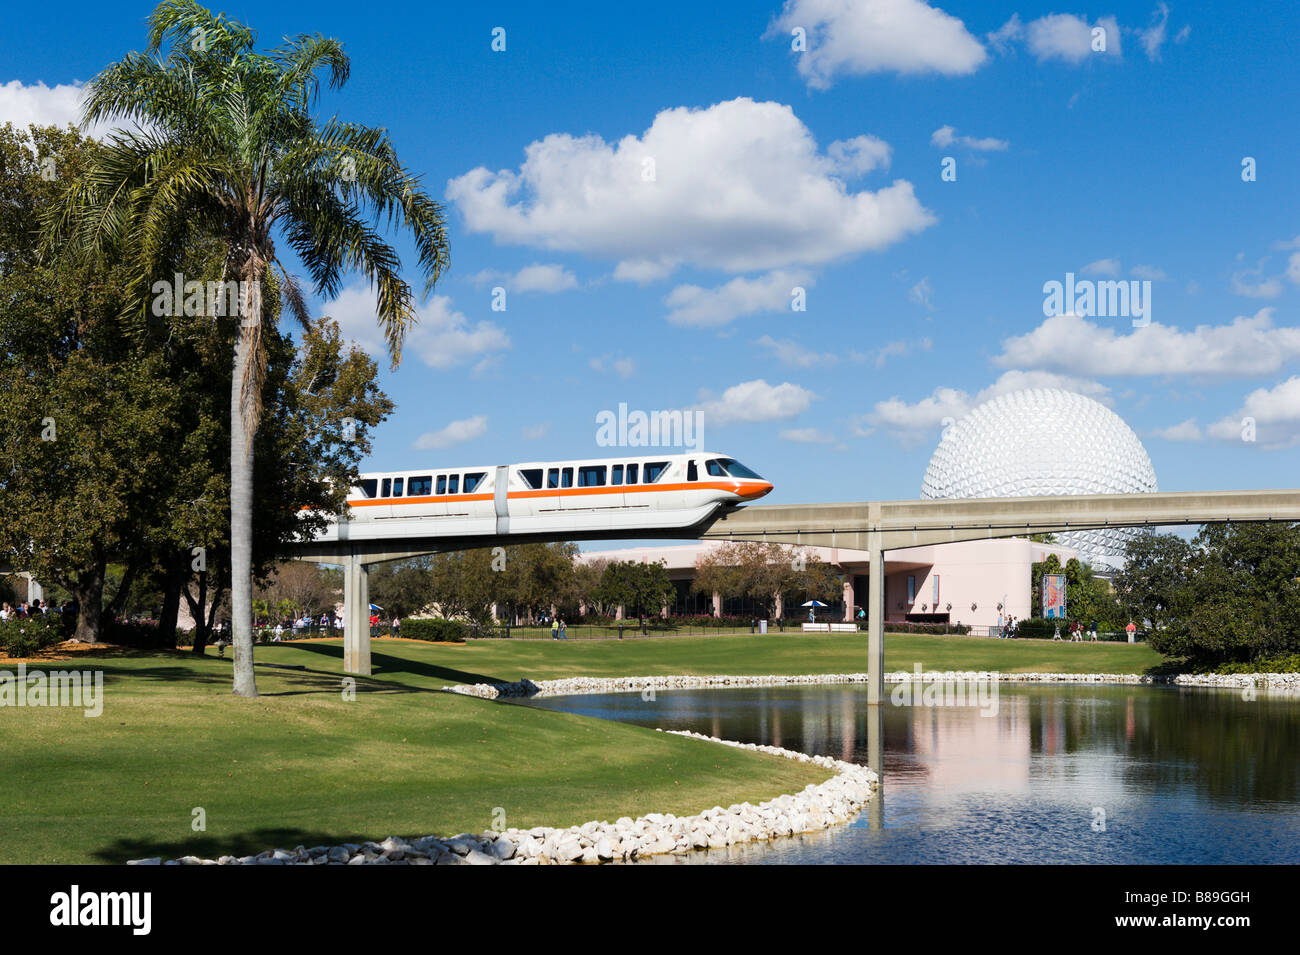 Monorail in front of the geodesic sphere of Spaceship Earth, Epcot Center, Walt Disney World Resort, Orlando, Florida, USA Stock Photo